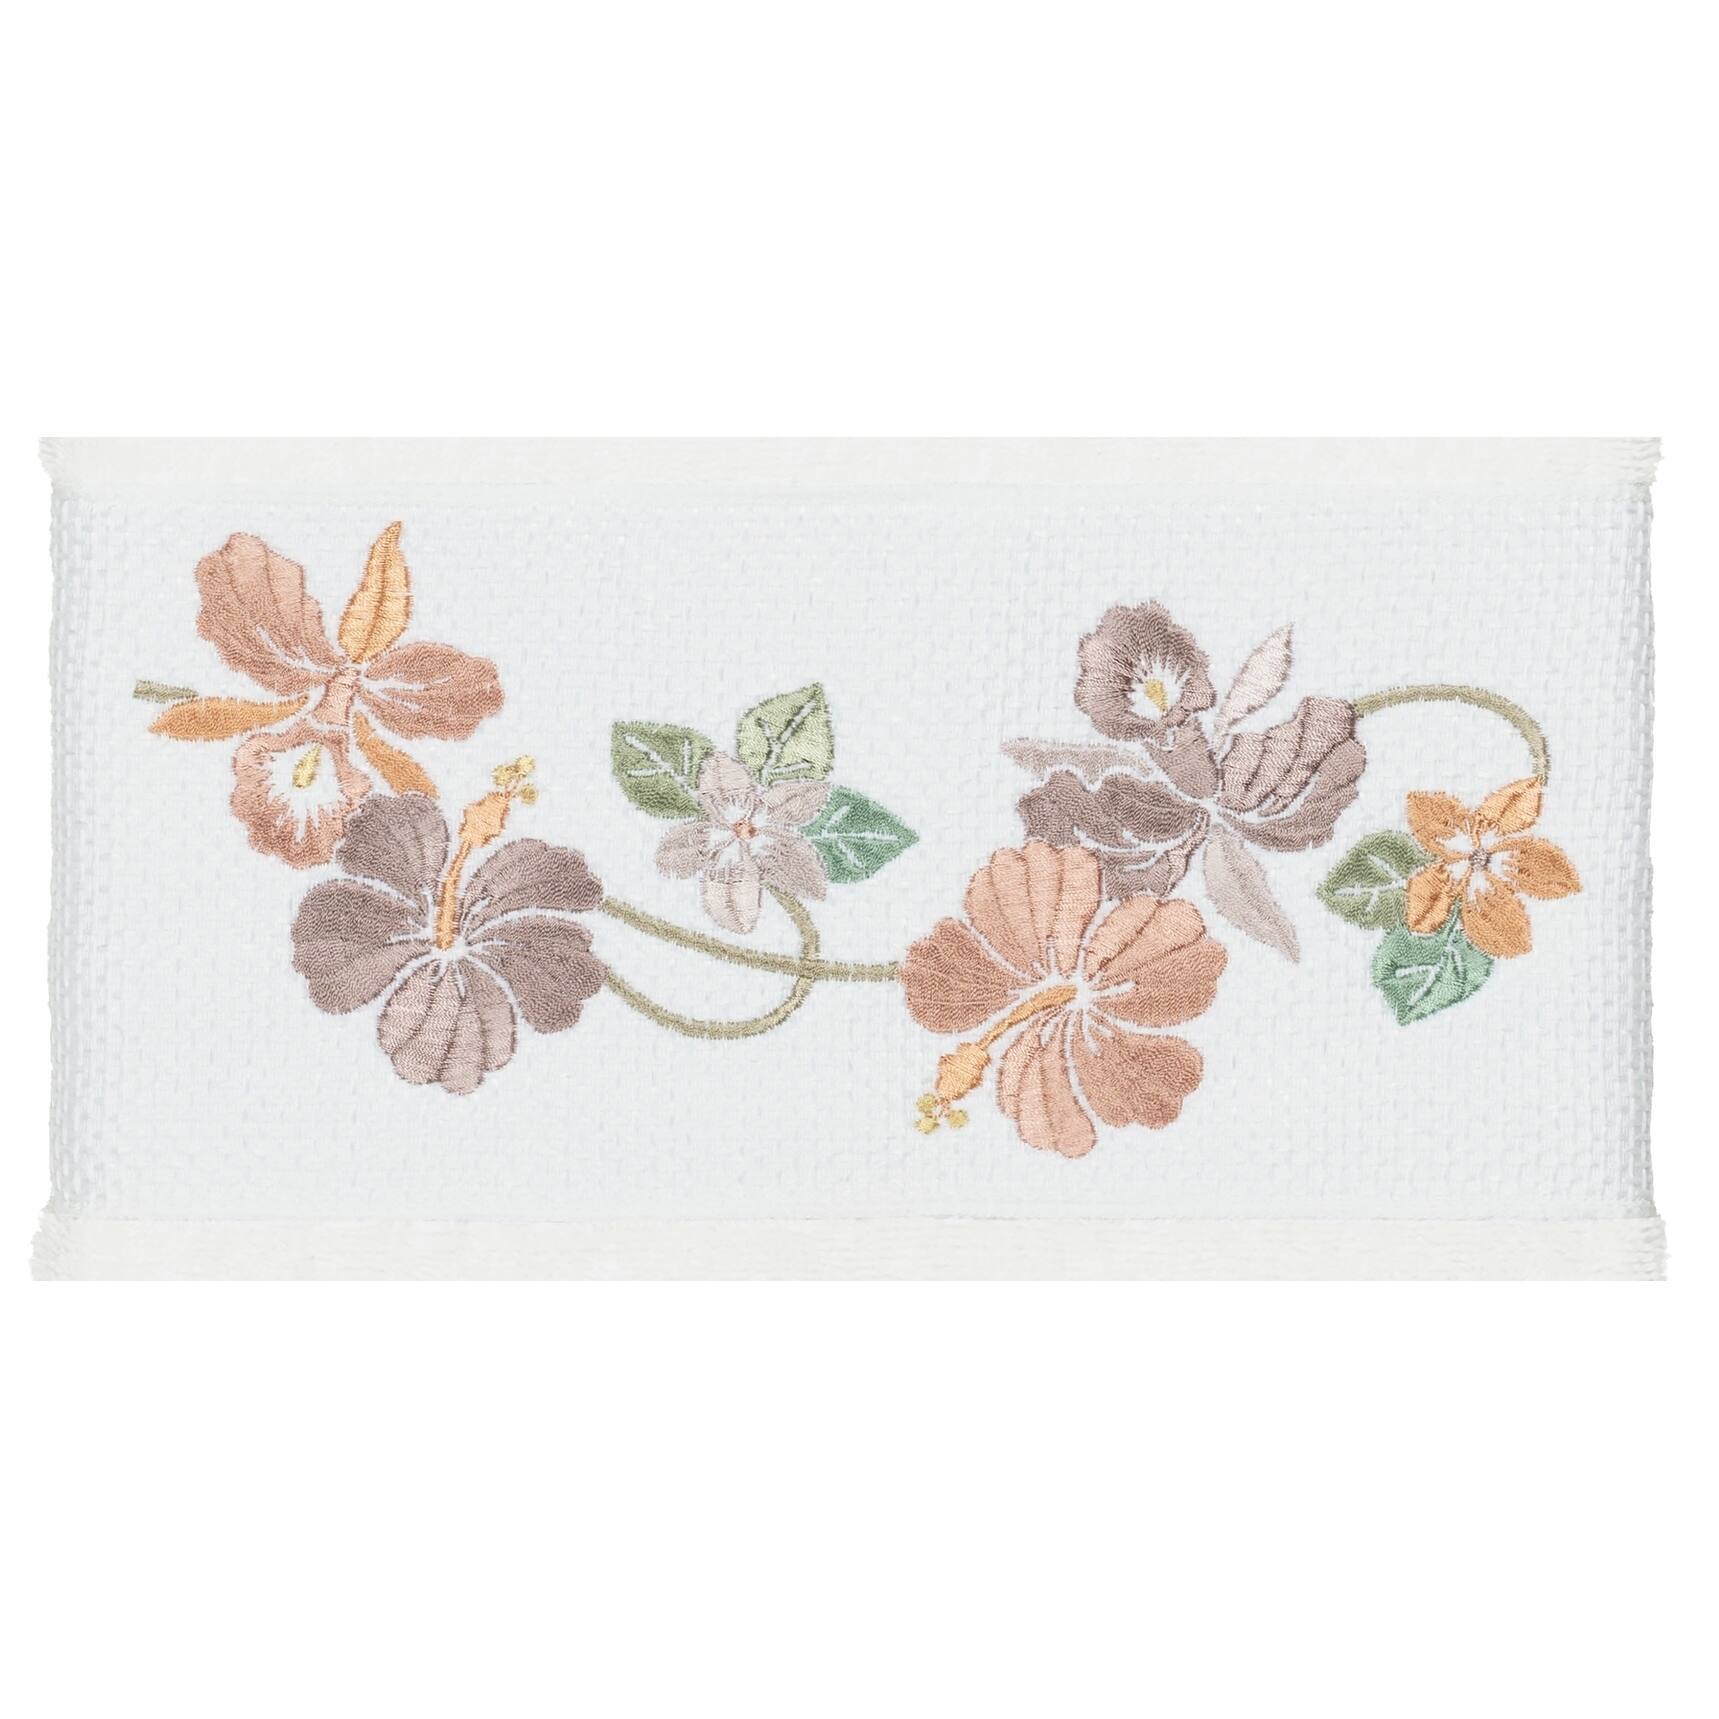 Authentic Hotel and Spa Turkish Cotton Floral Vine Embroidered White 4-piece Bath Towel Set